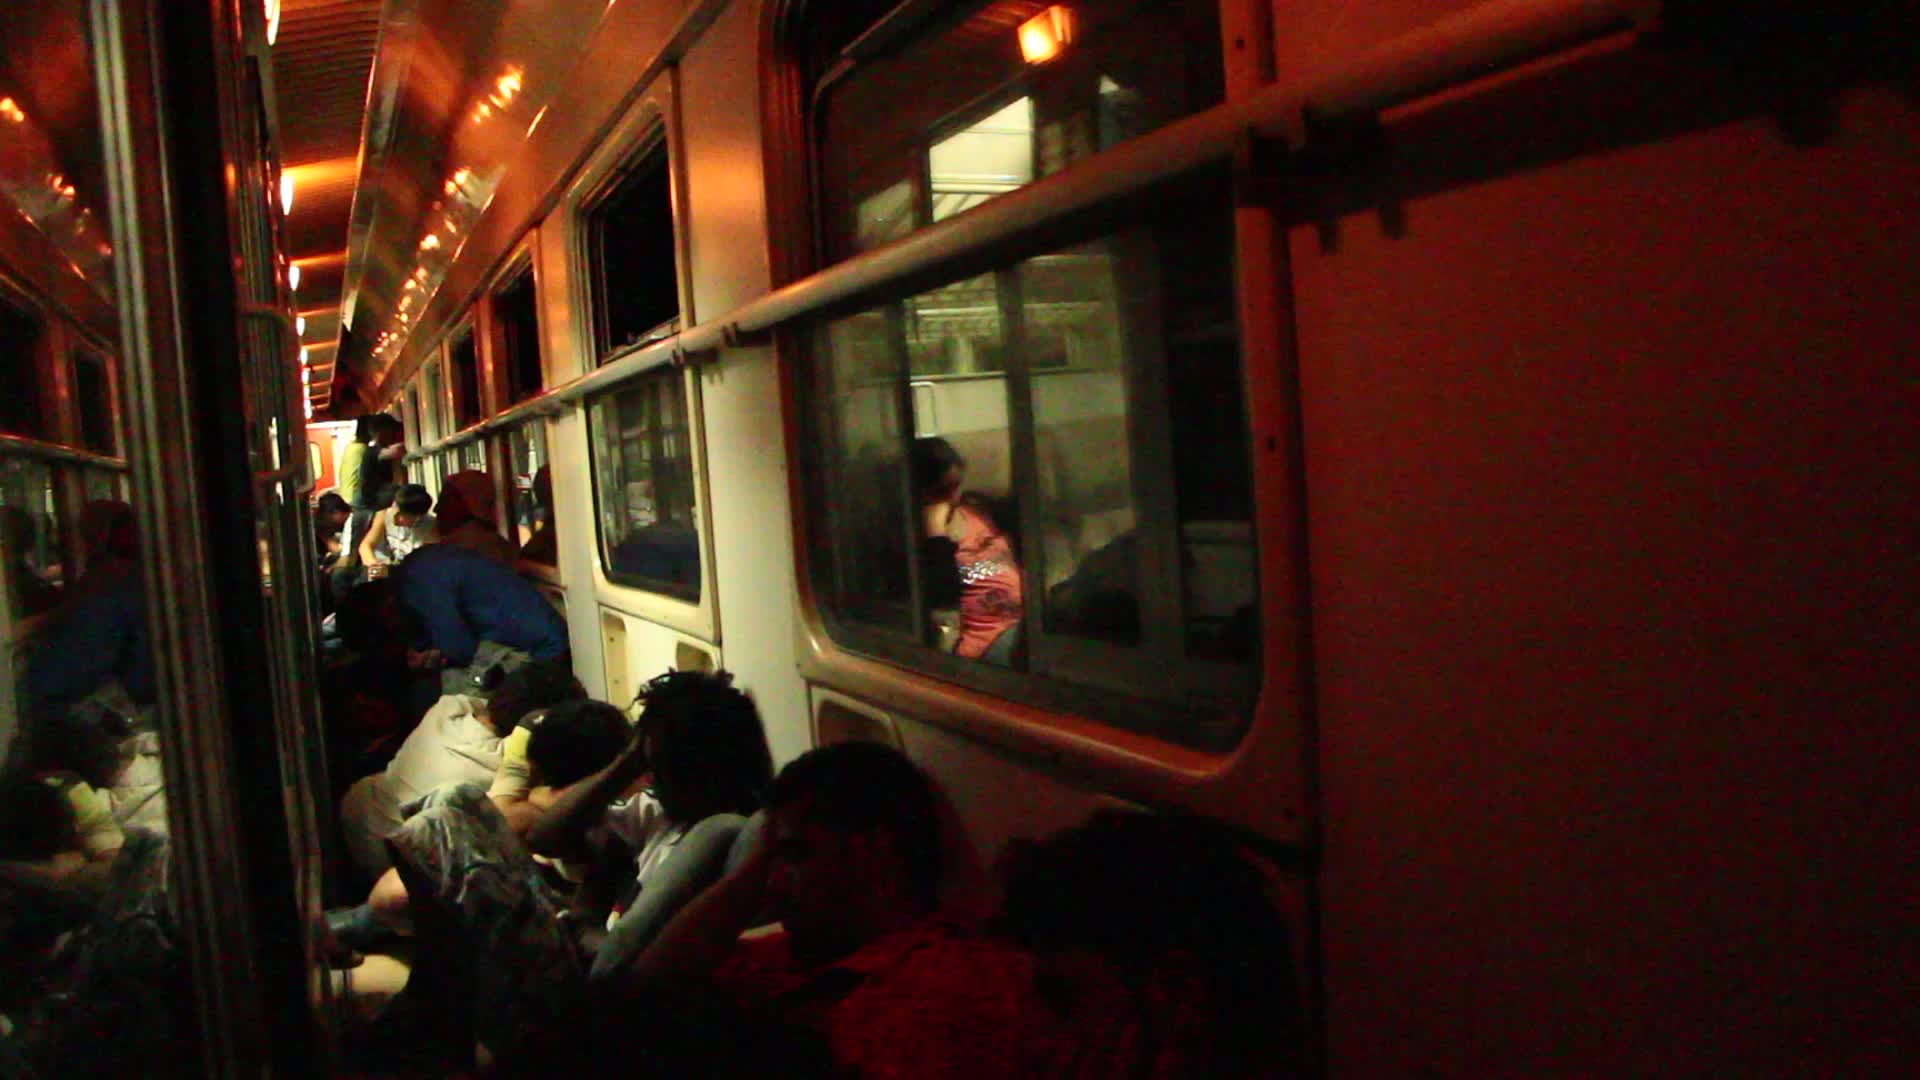 In the train to Serbian border.